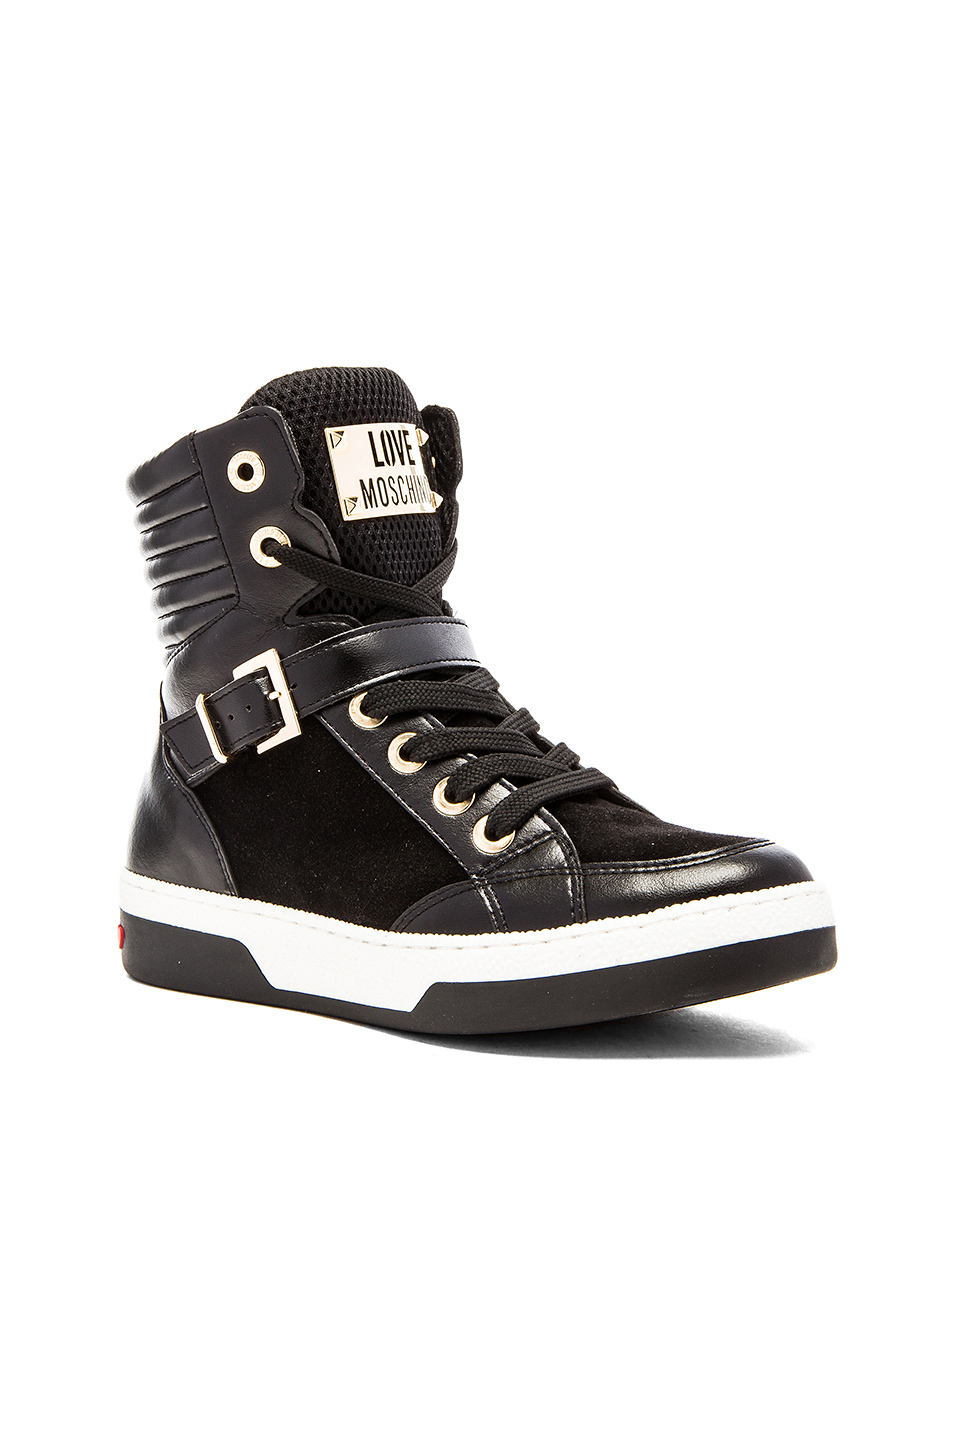 Love Moschino Leather High-top Sneaker in Black & White (Black) - Lyst